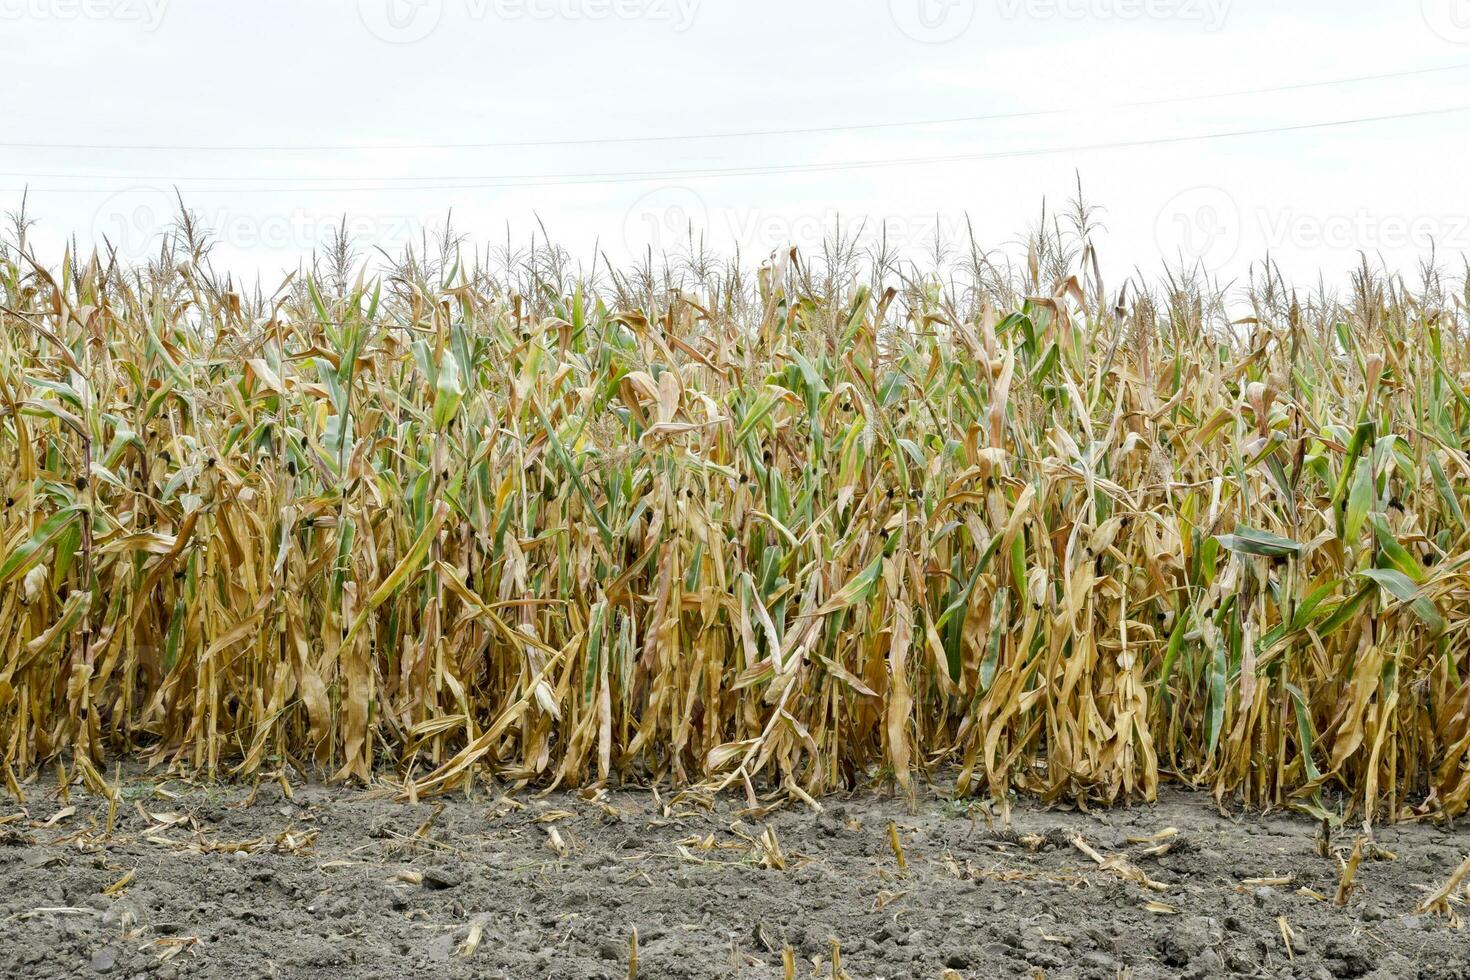 Ripened corn on the field. Almost dry stems of corn. photo